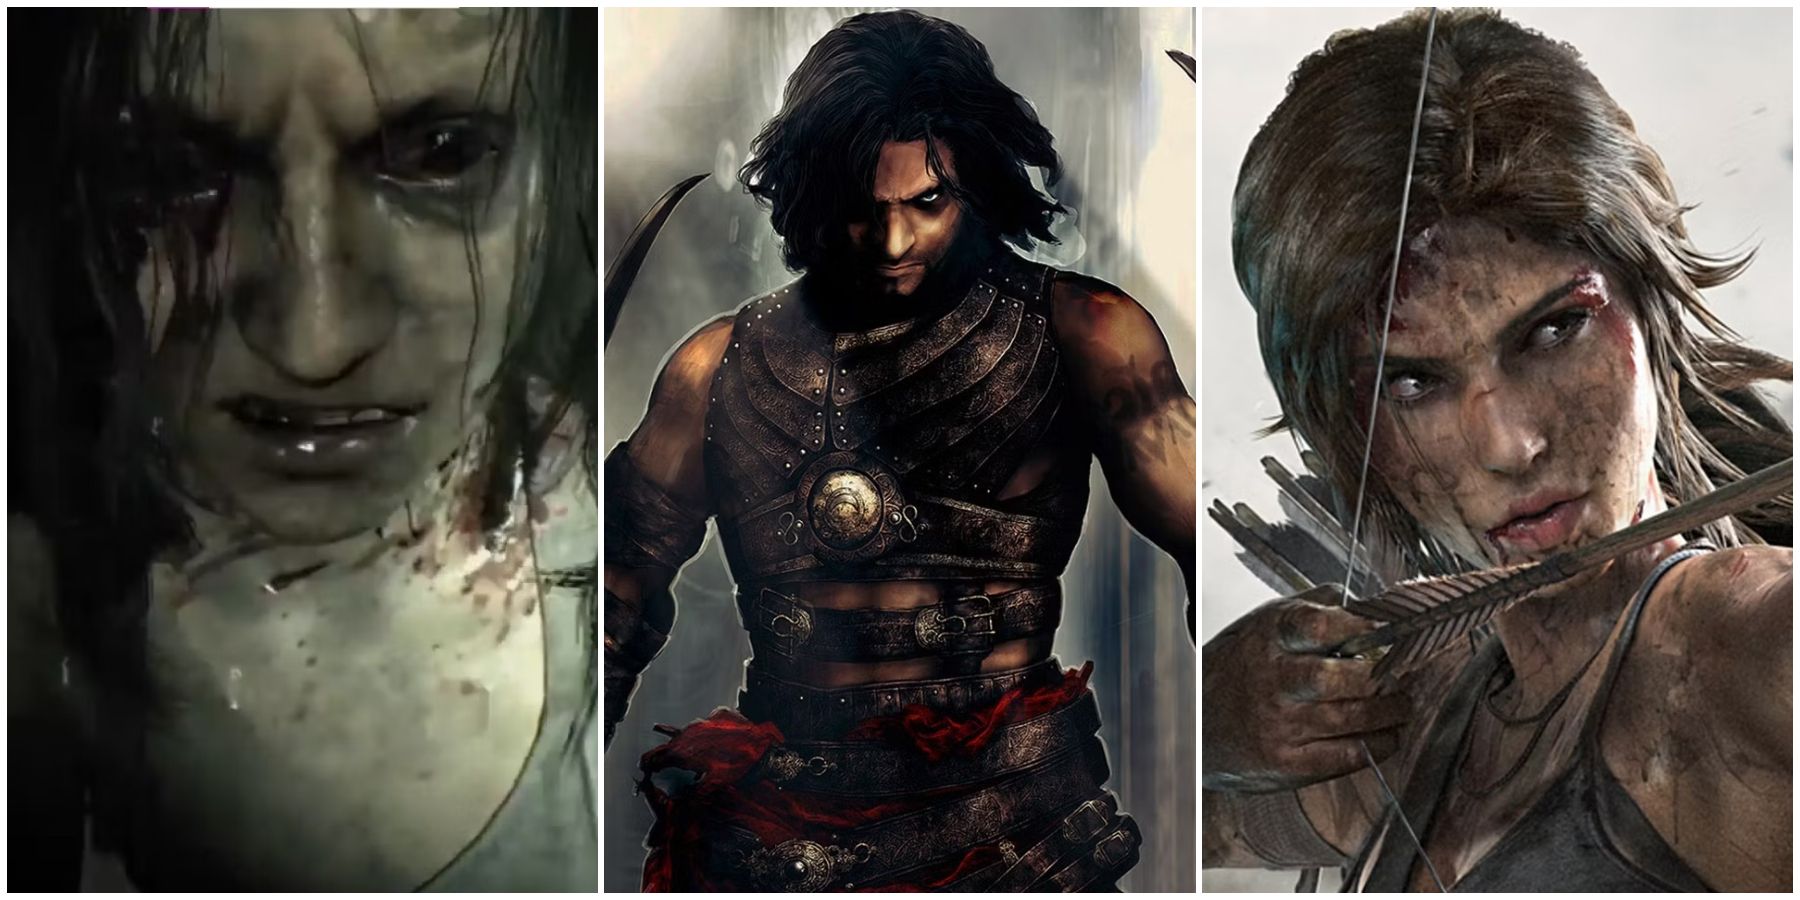 8 Dark Edgy Video Game Reboots That Are Actually Great